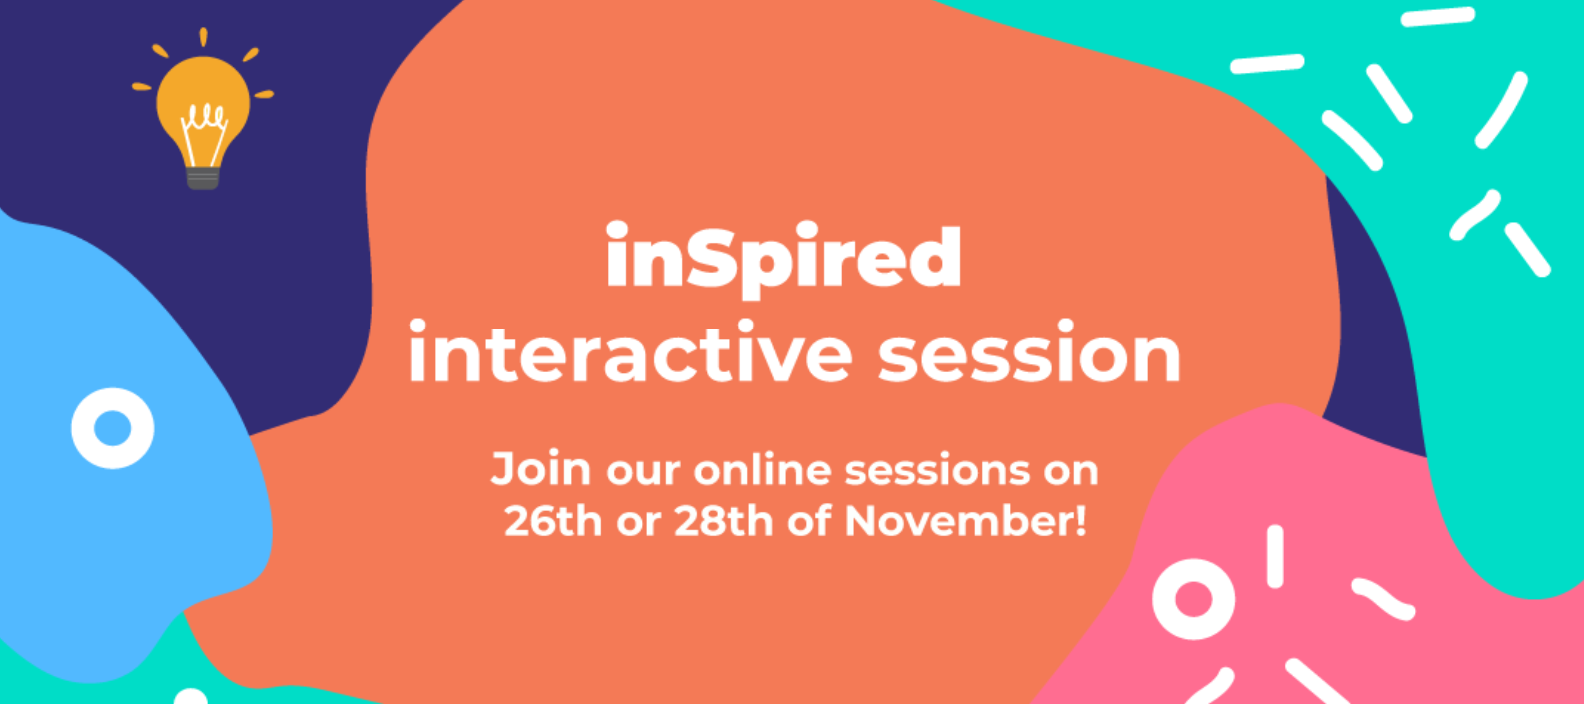 Coming up: inSpired interactive session